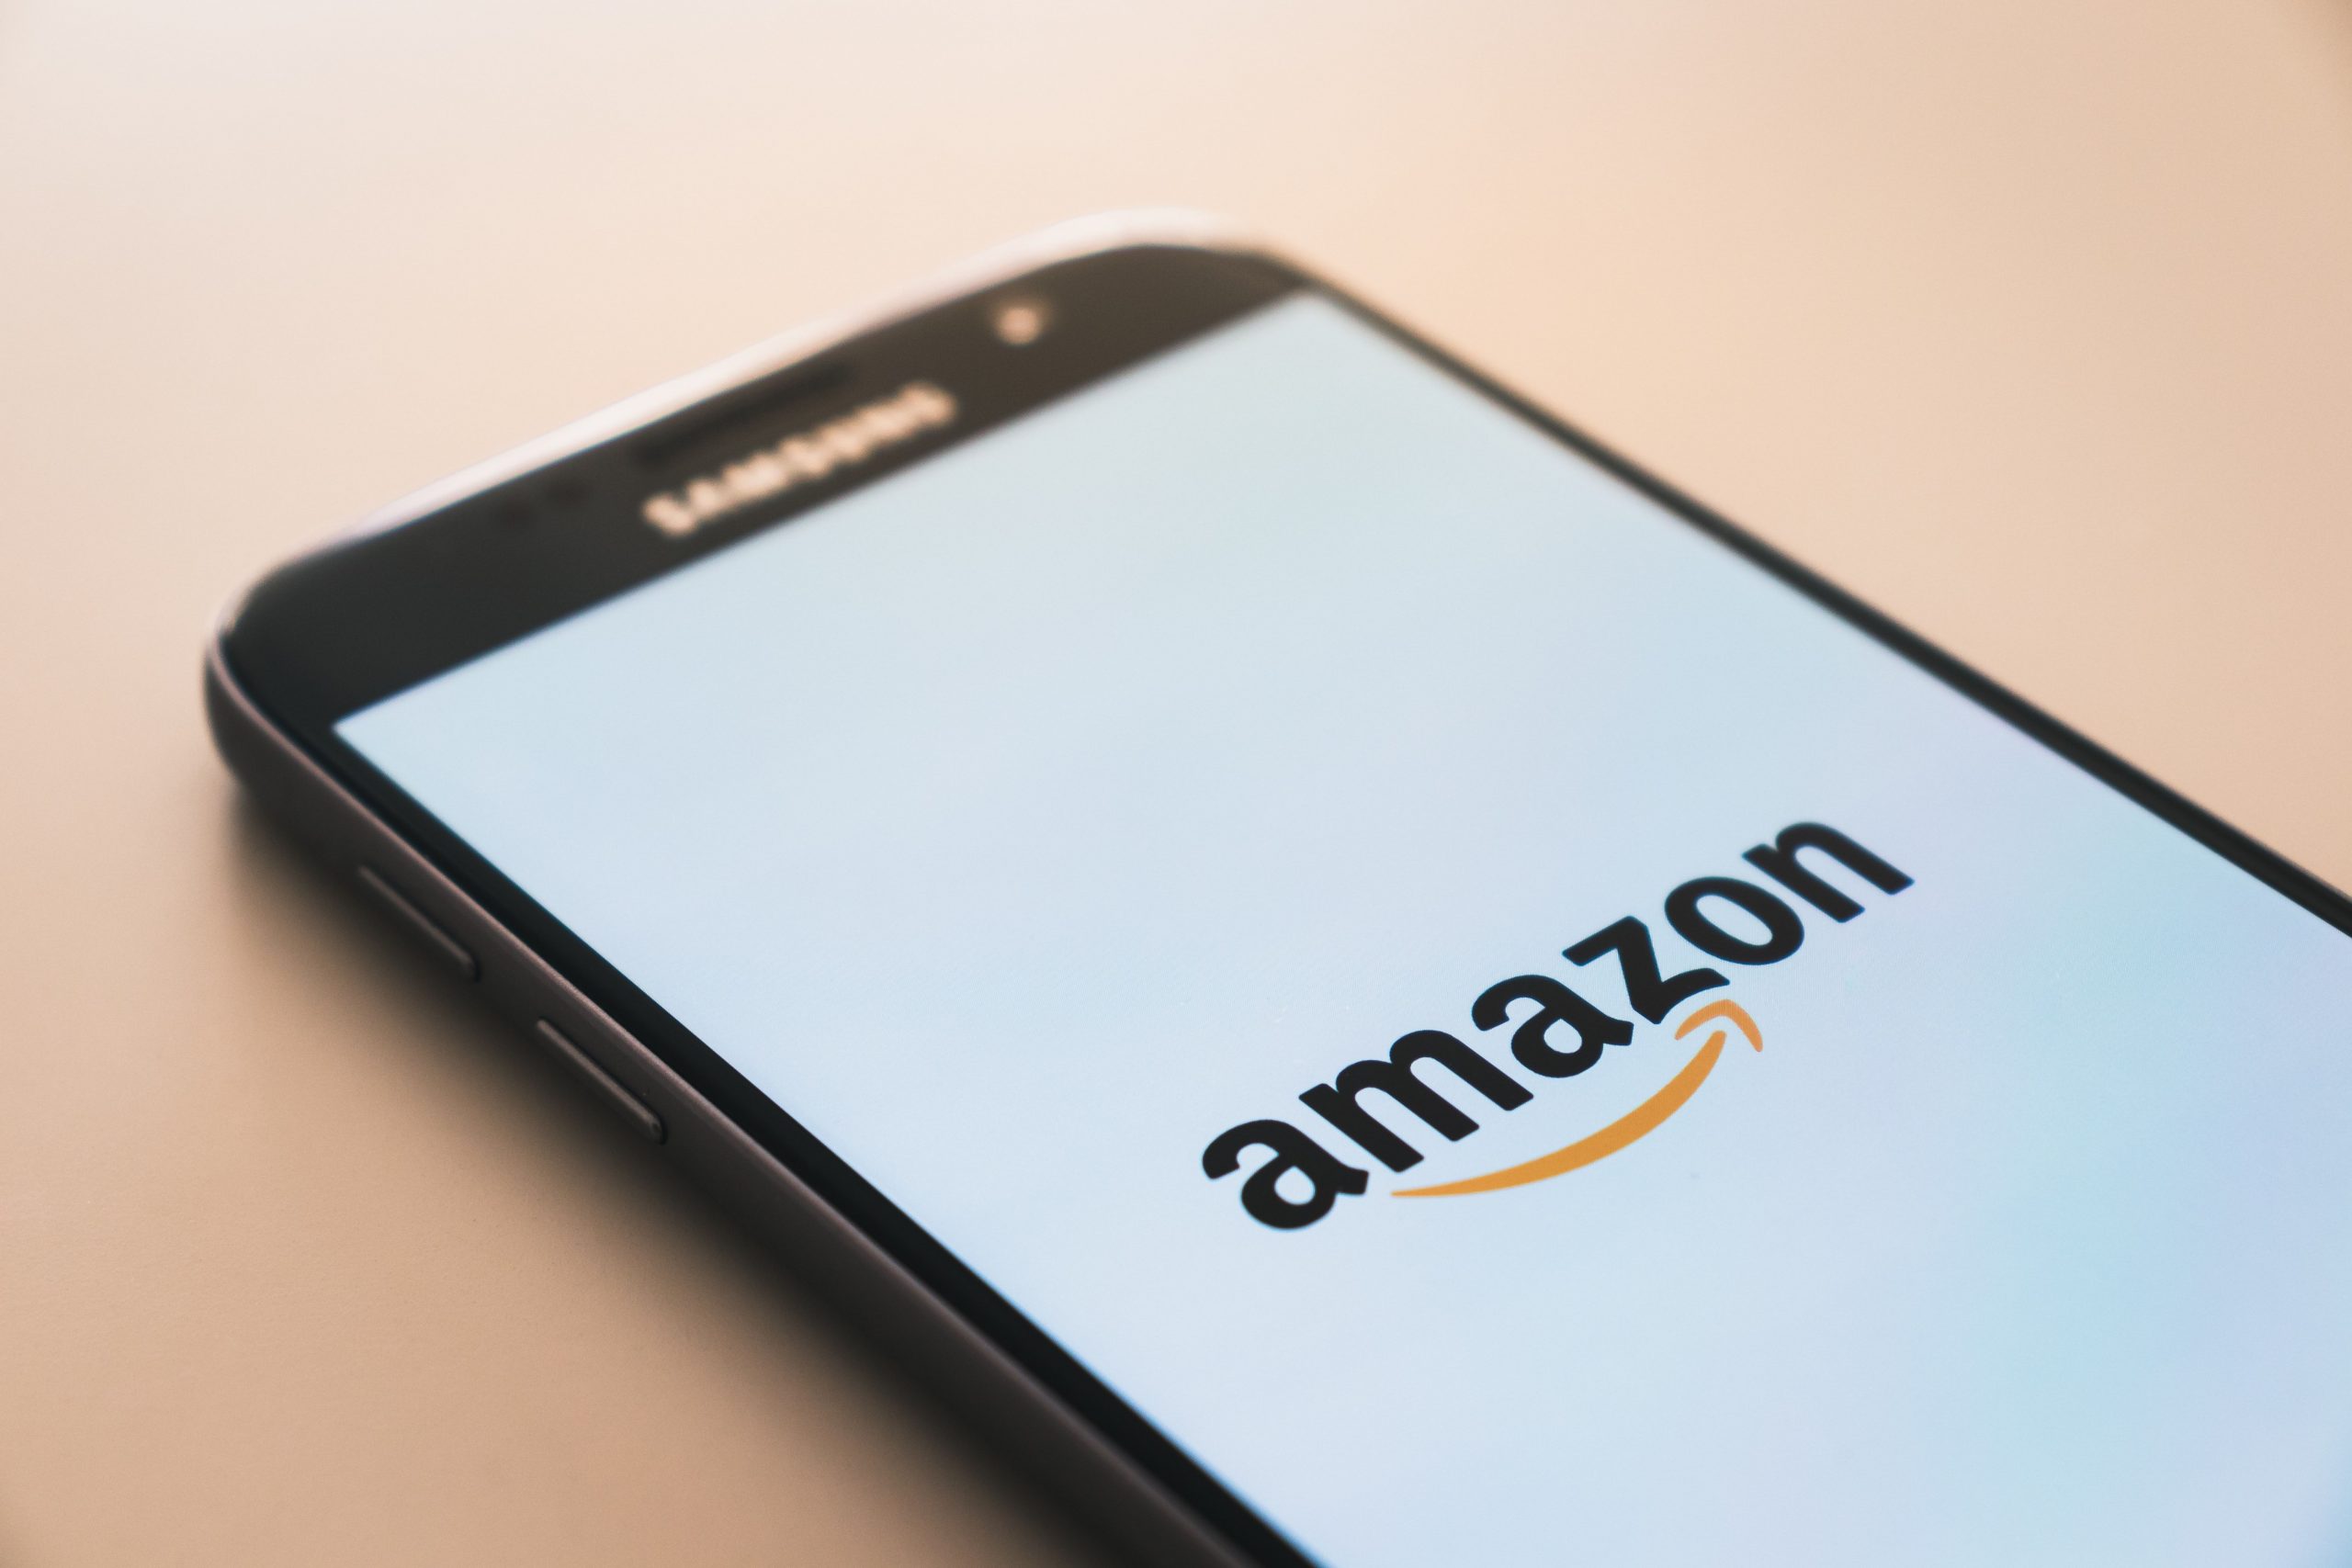 A look at smartphone deals from Amazon Great Indian Festival sale 2021